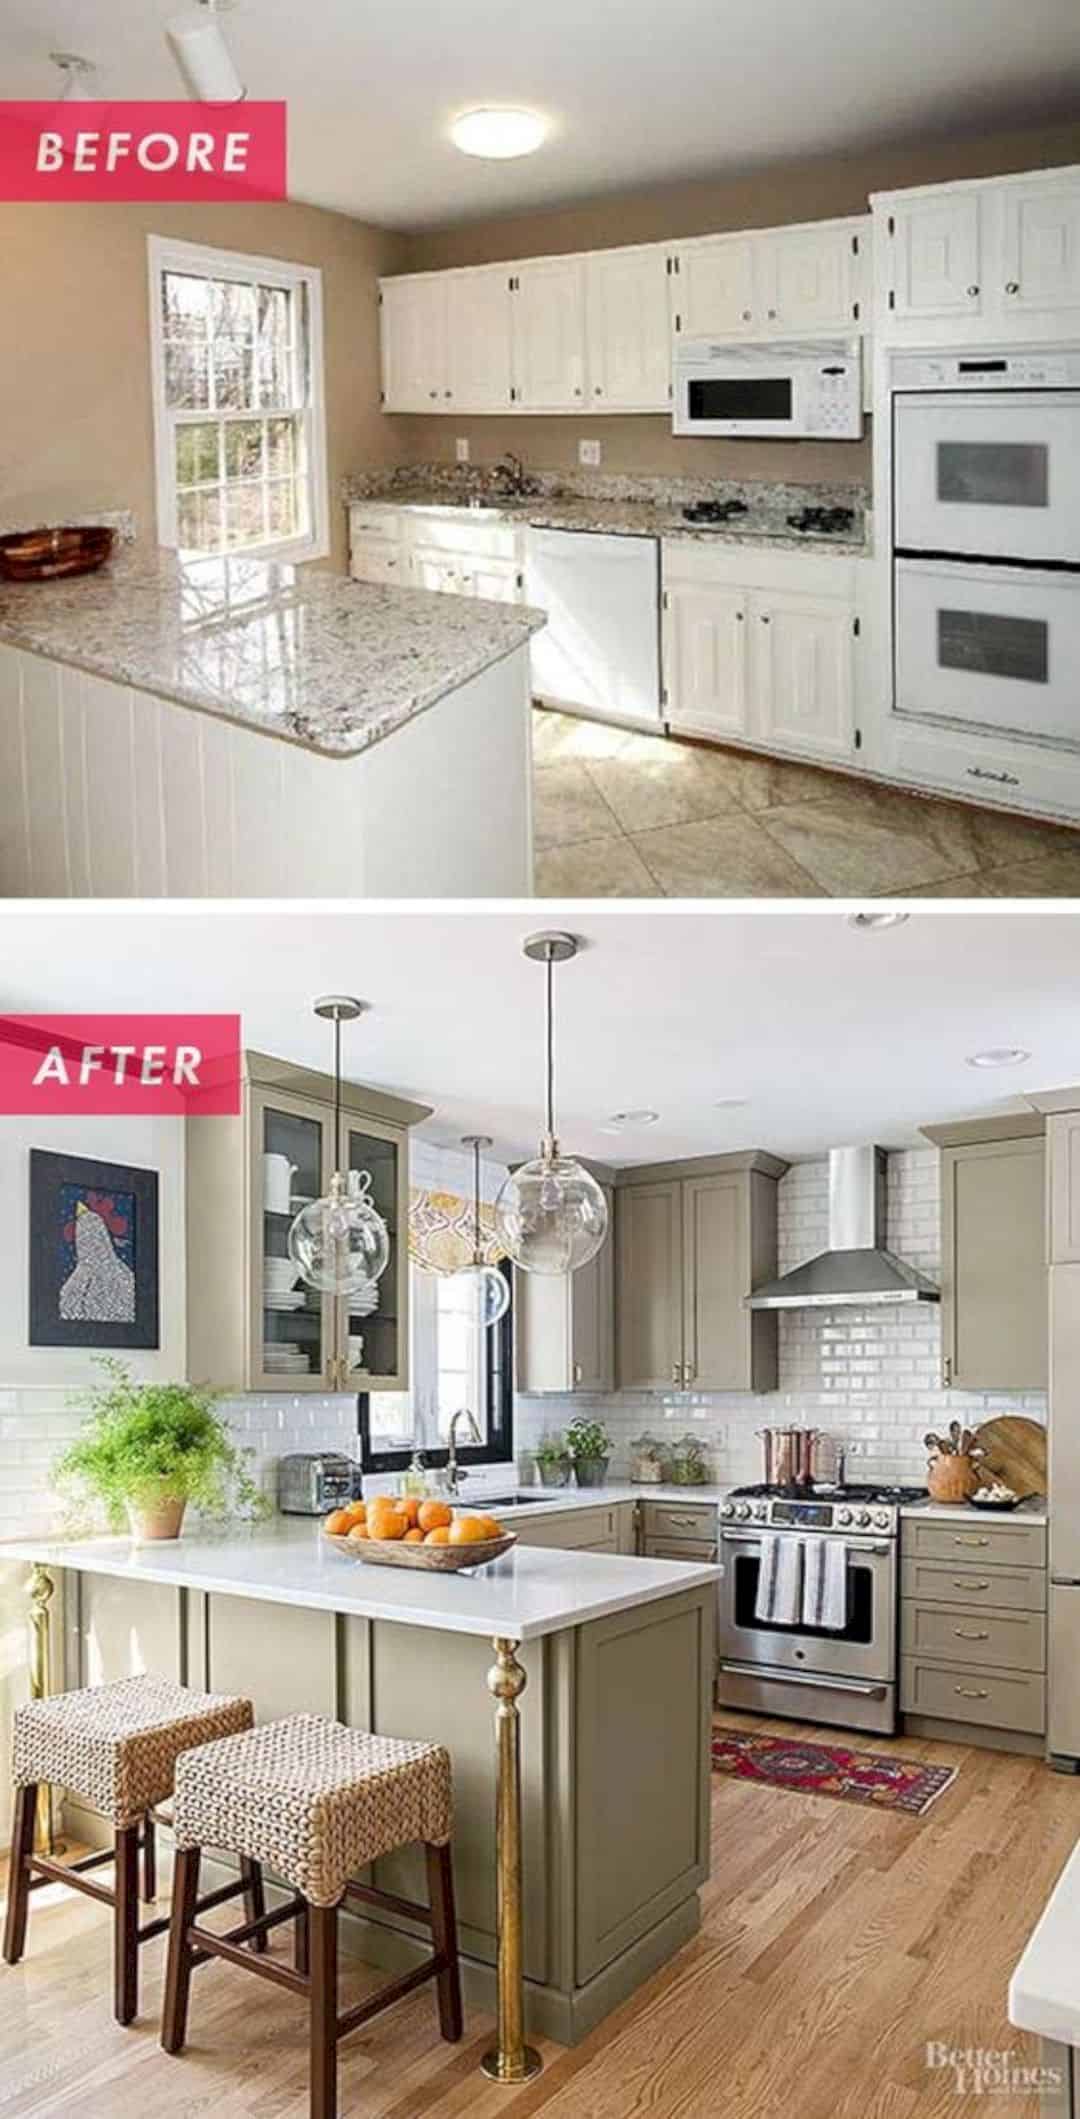 Before and After 10 Stunning Kitchen Transformations